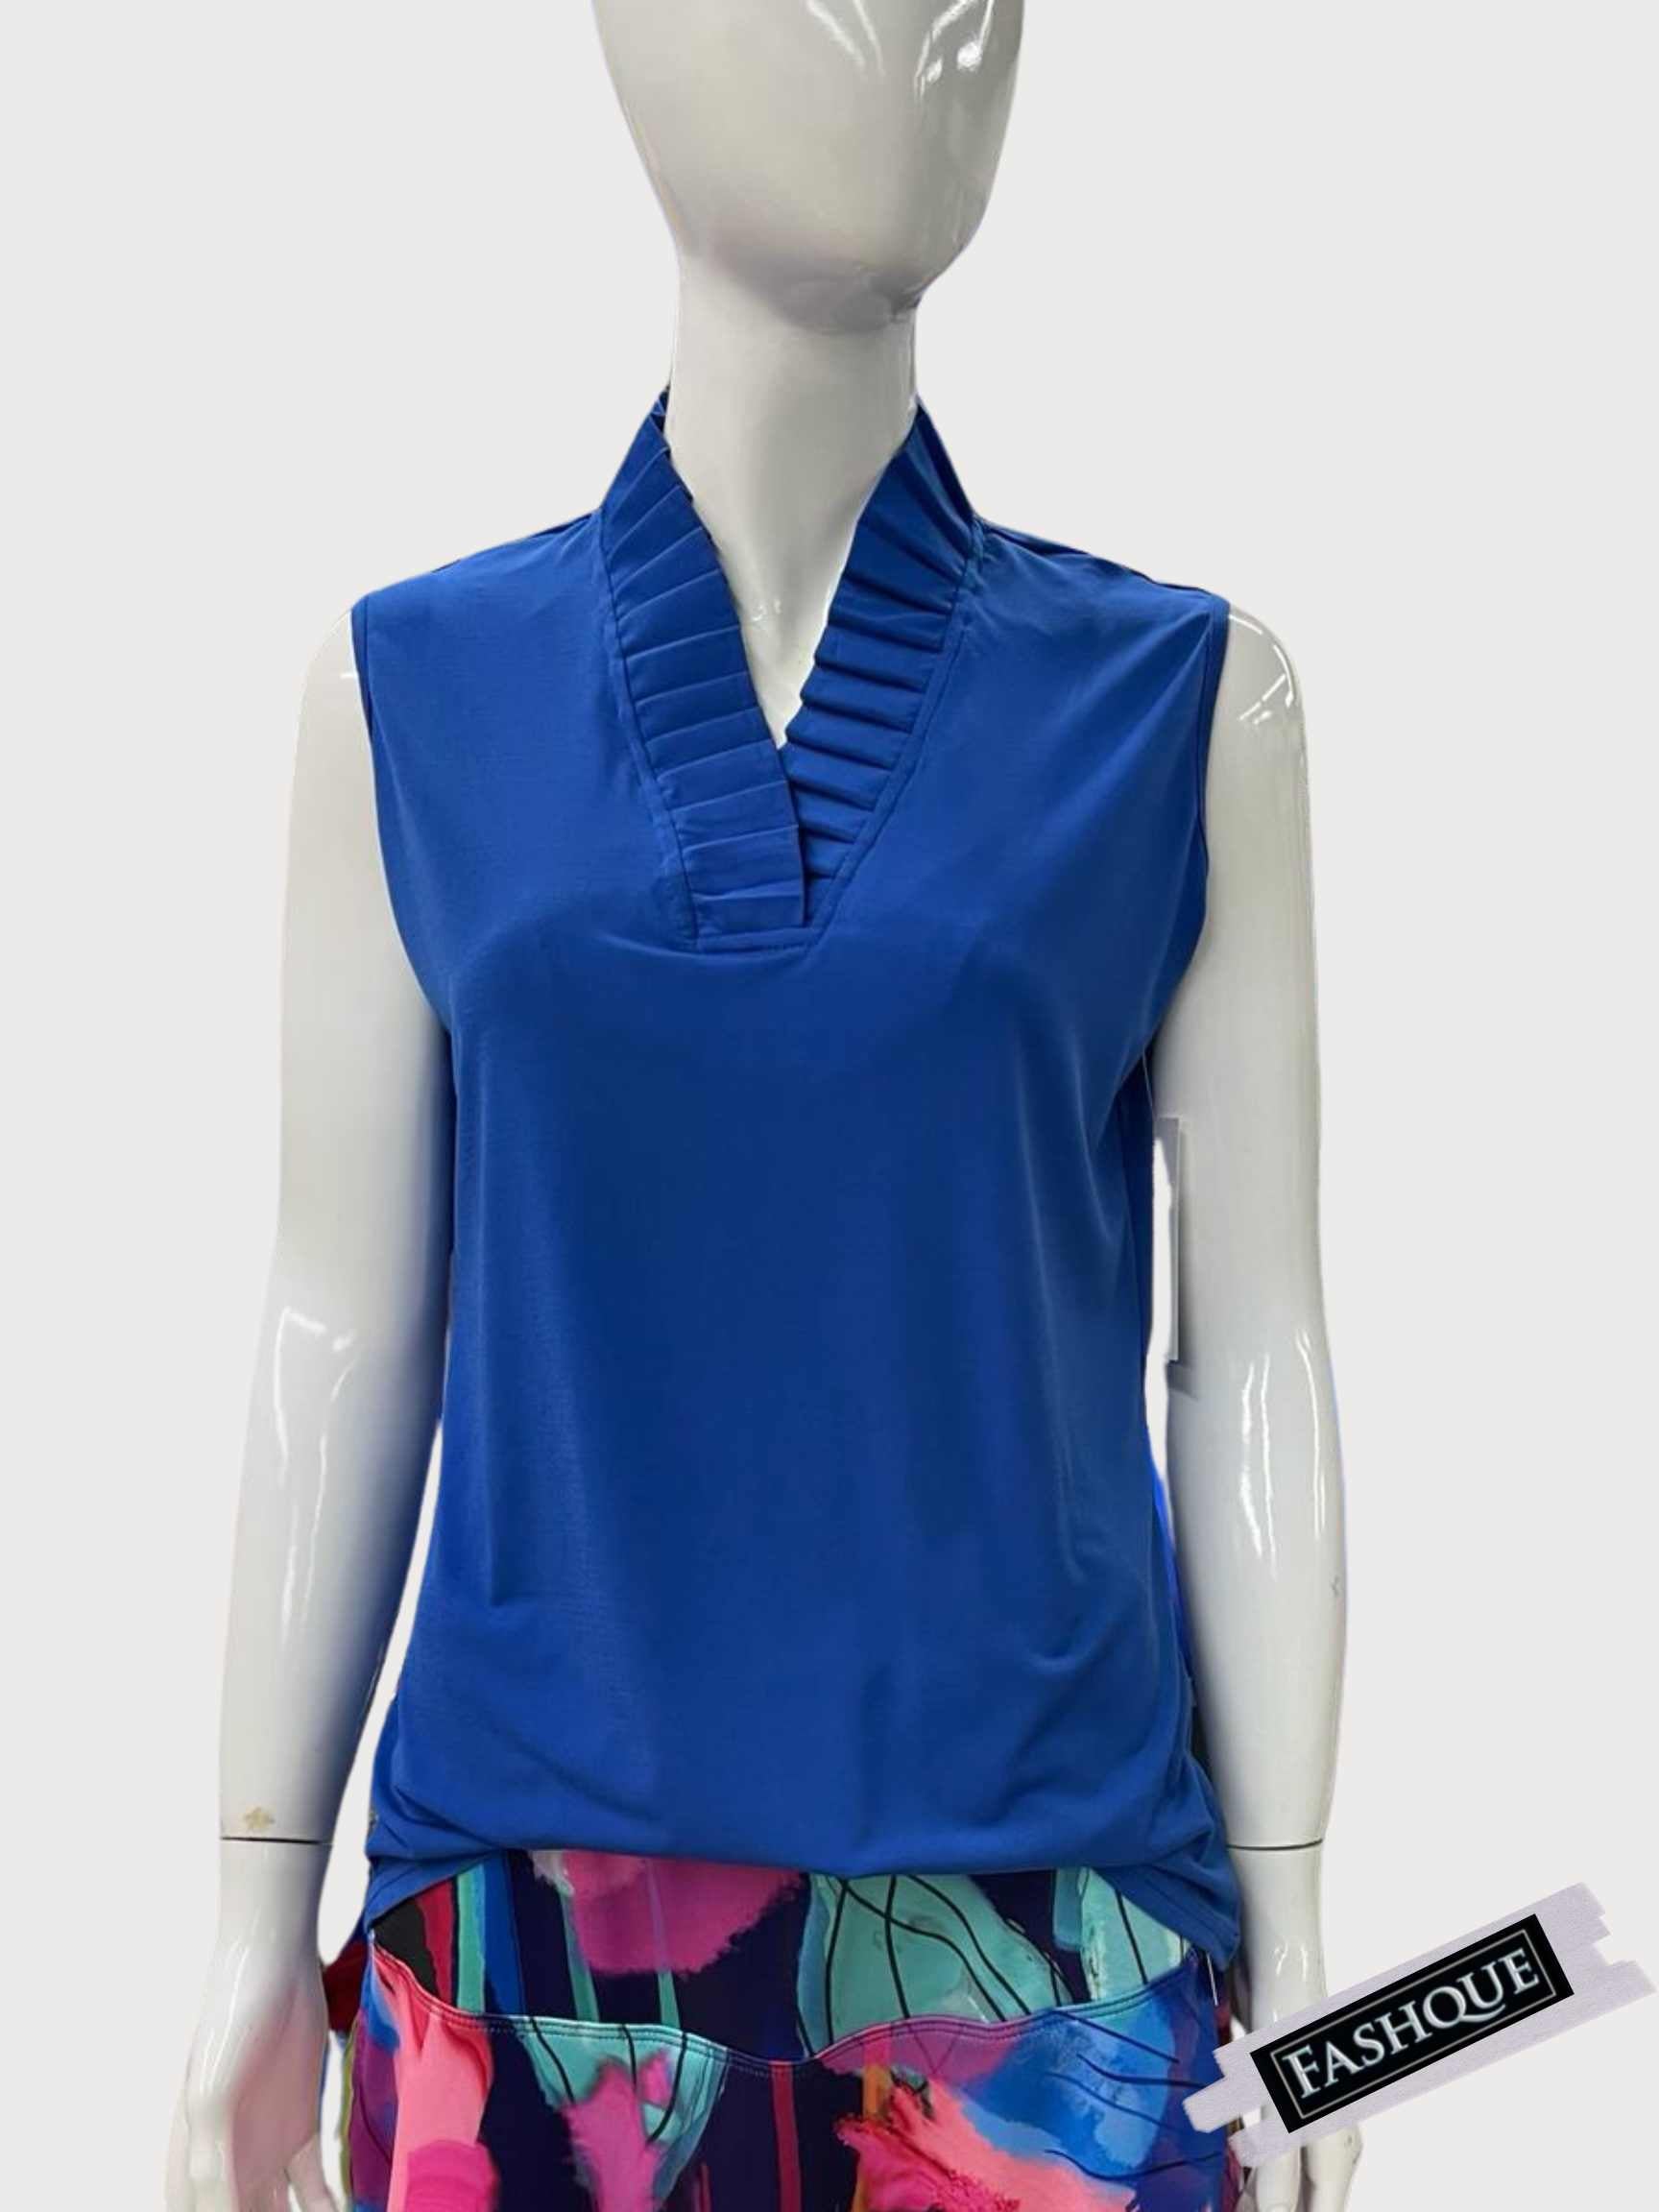 FASHQUE - Stand Collar Pleated Frilled Ruffle Sleeveless Top - T623